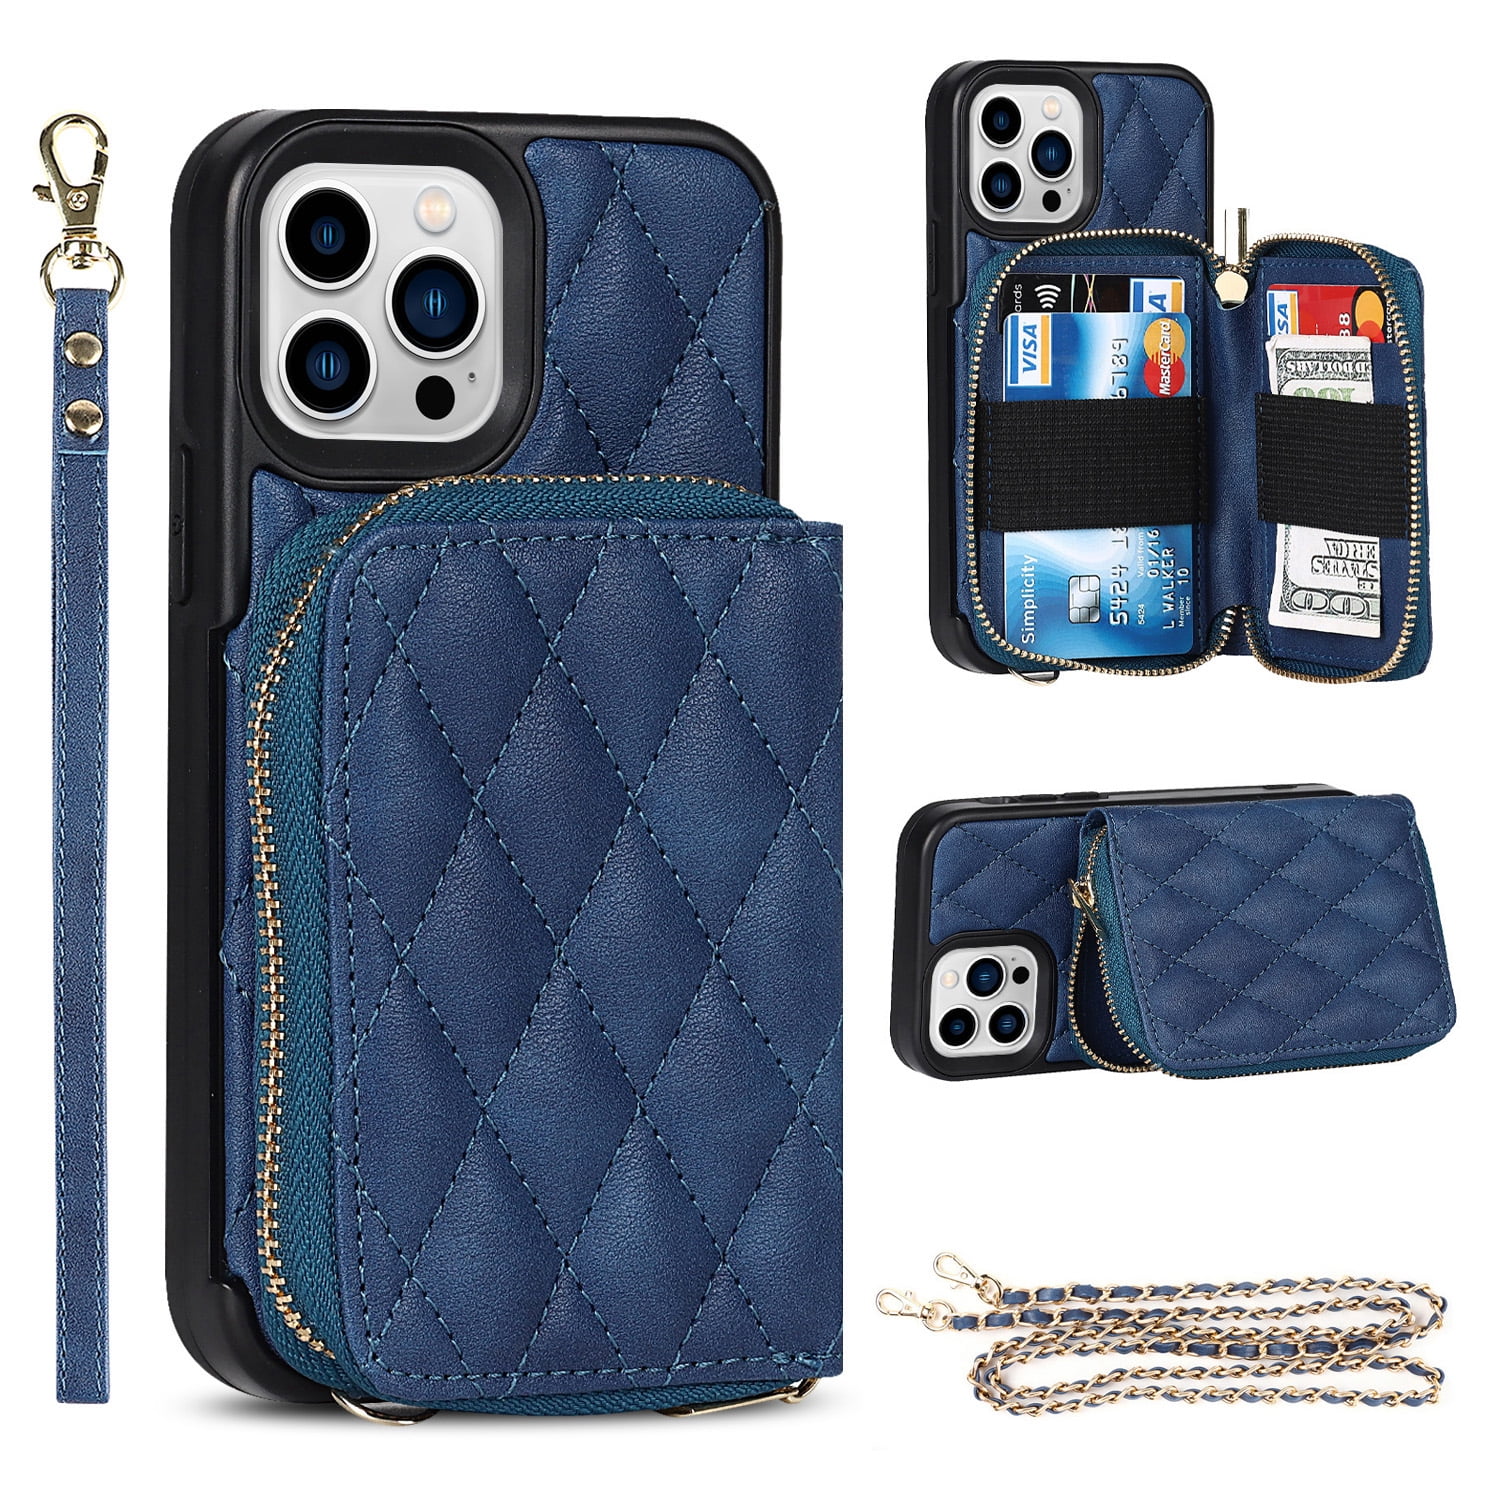 Holstere Ultra-Durable Pebbled Black Genuine Leather iPhone Case Crossbody Purse w/ Expanded Card Pocket - iPhone 12 Pro Max